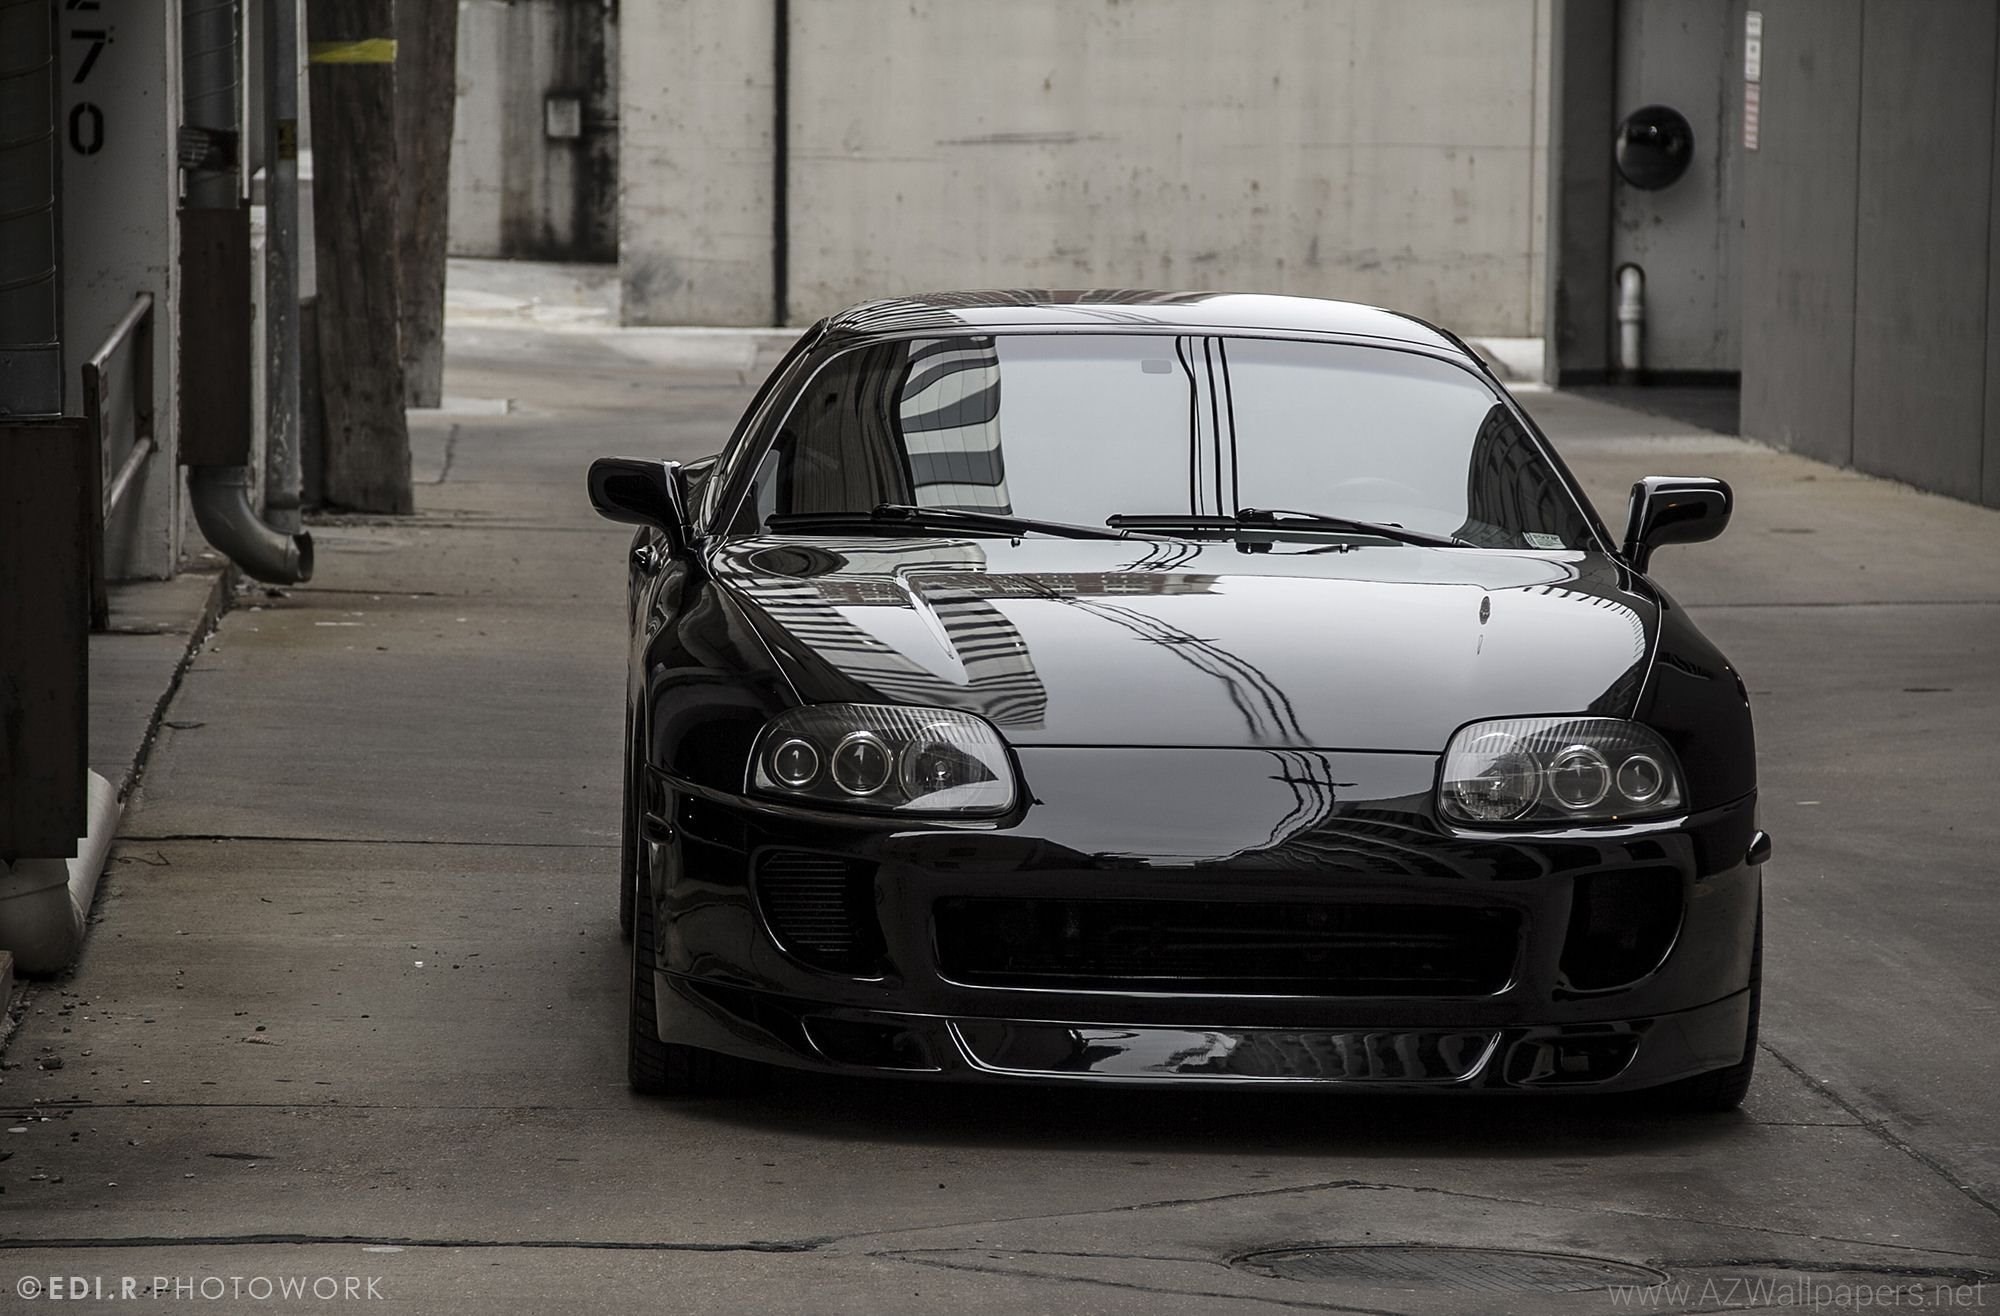 Tuned Toyota Supra Wallpapers